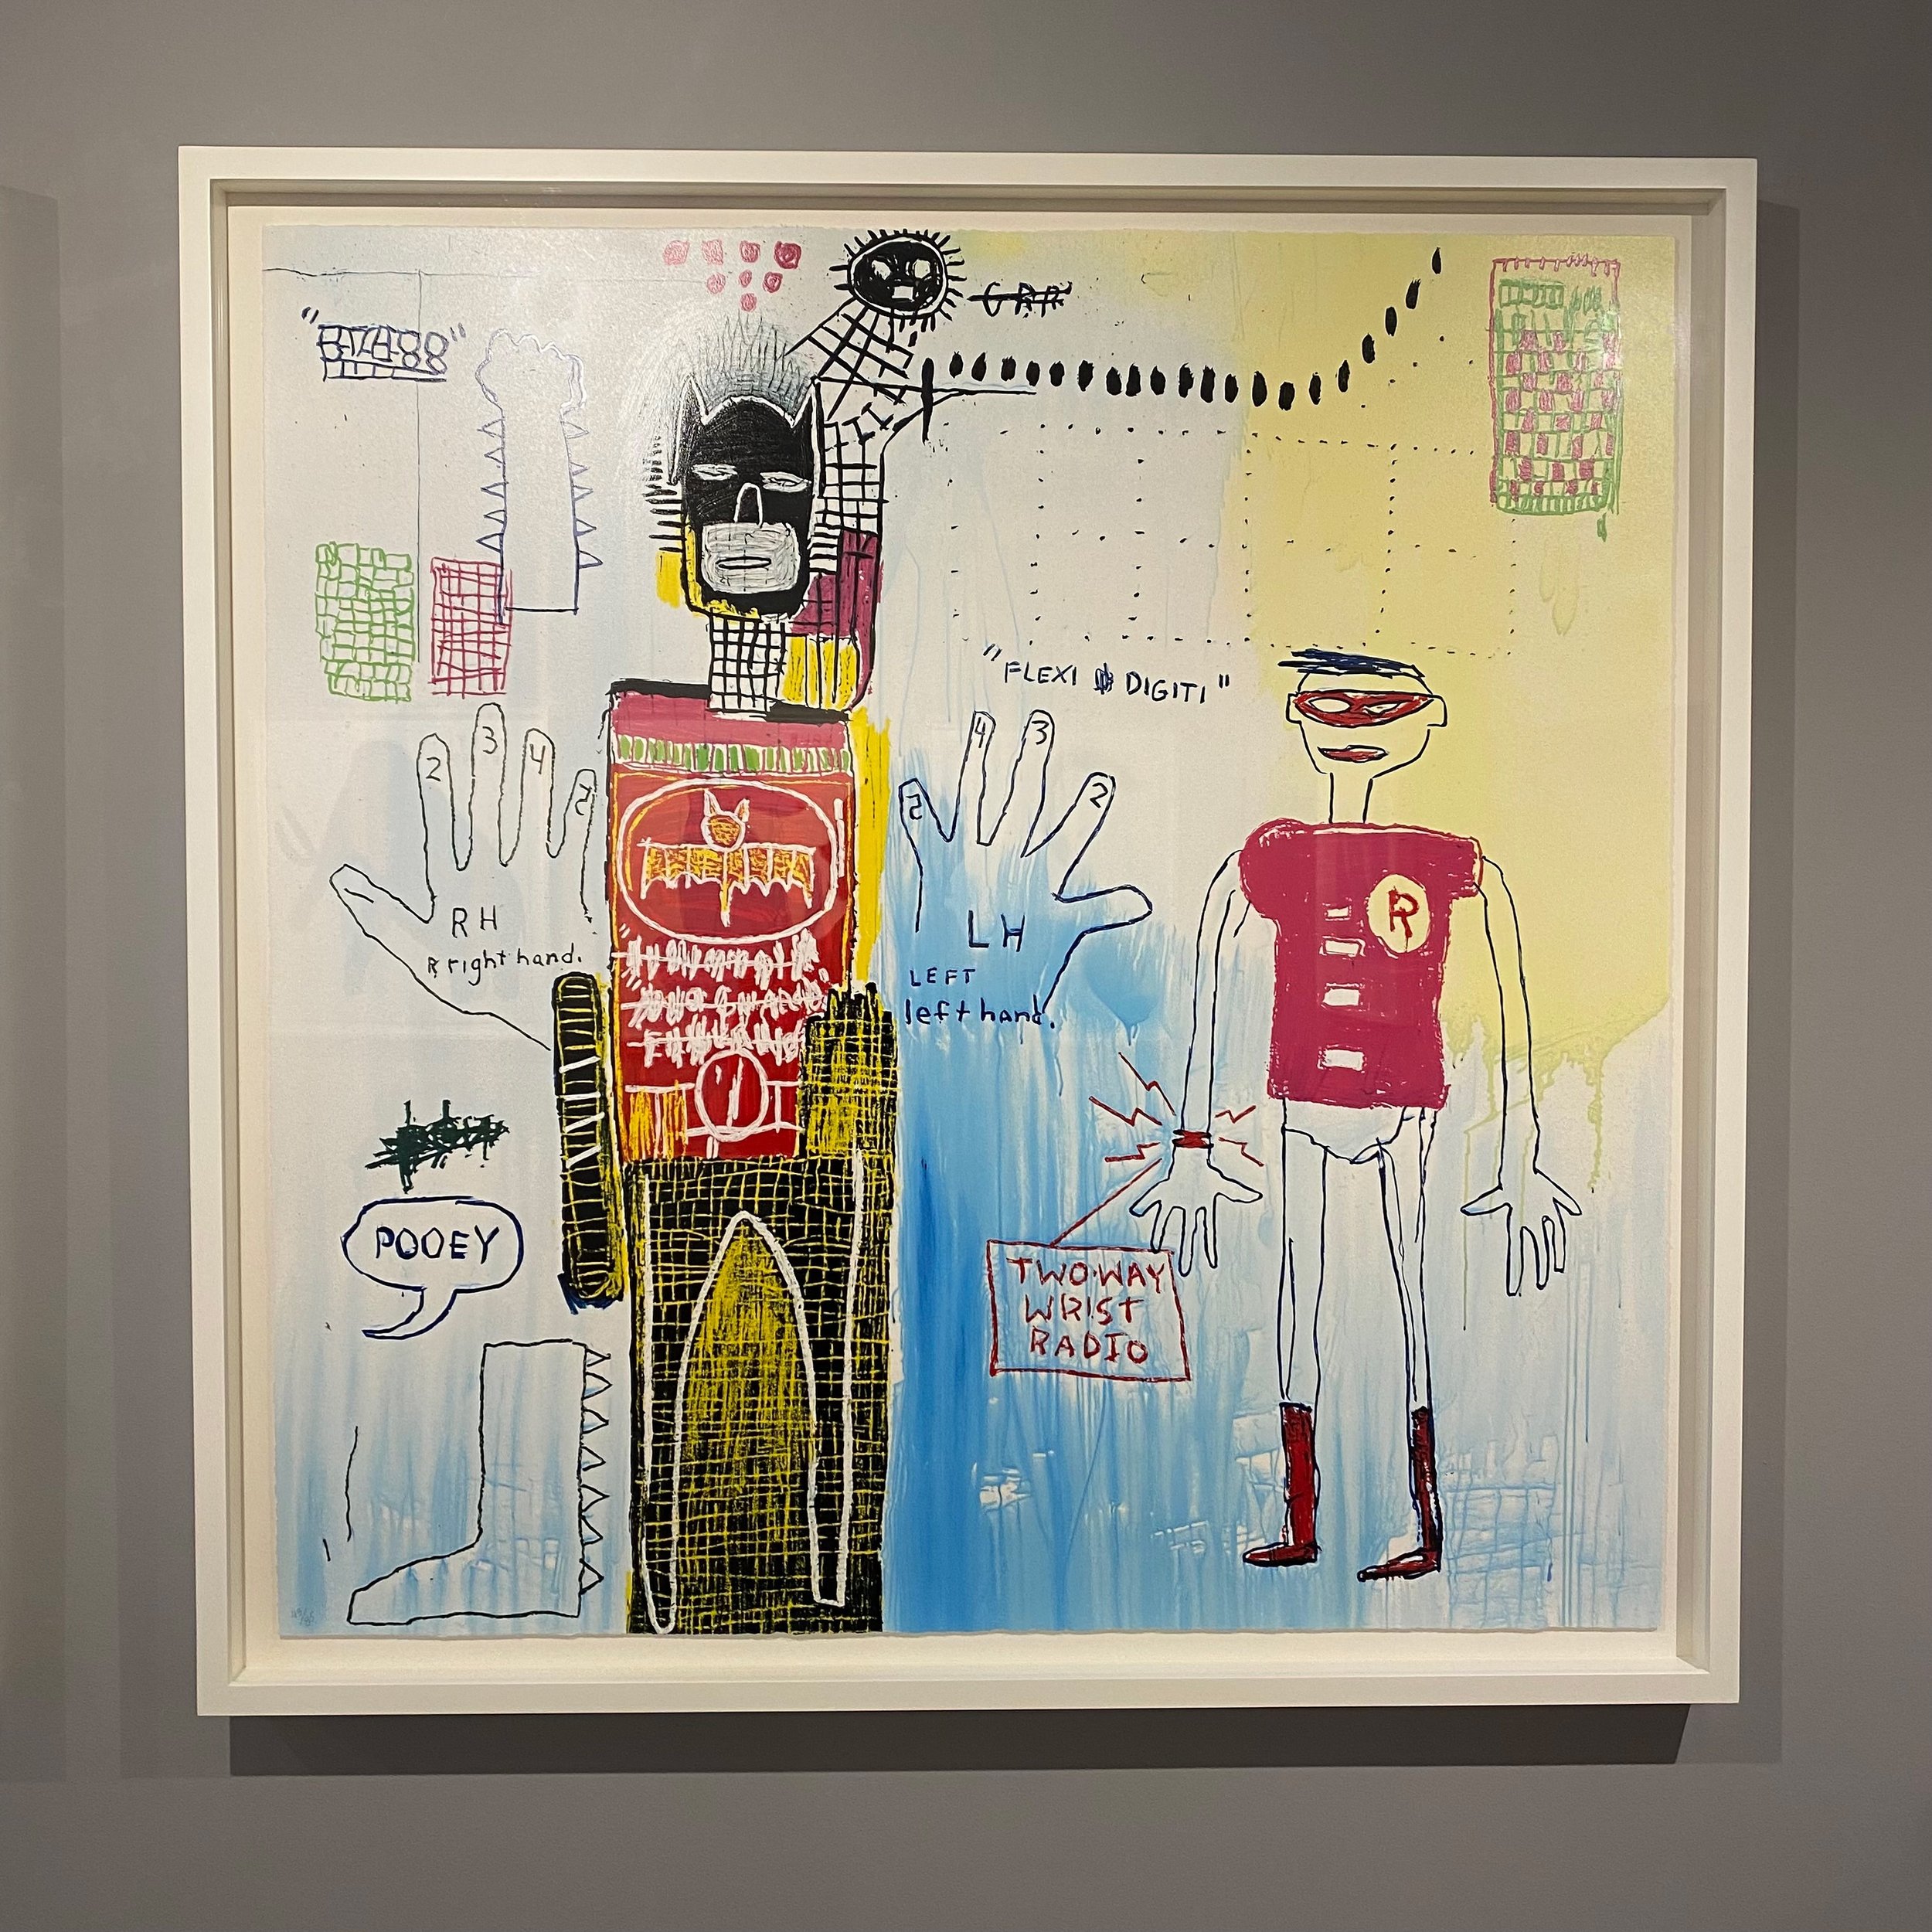 Themed around the influence of comic books, Jean-Michel Basquiat&rsquo;s Superhero portfolio features renditions of pop culture heroes inspired by his childhood love for cartoonism. The works contain several archetypal Basquiat stylistic concepts suc